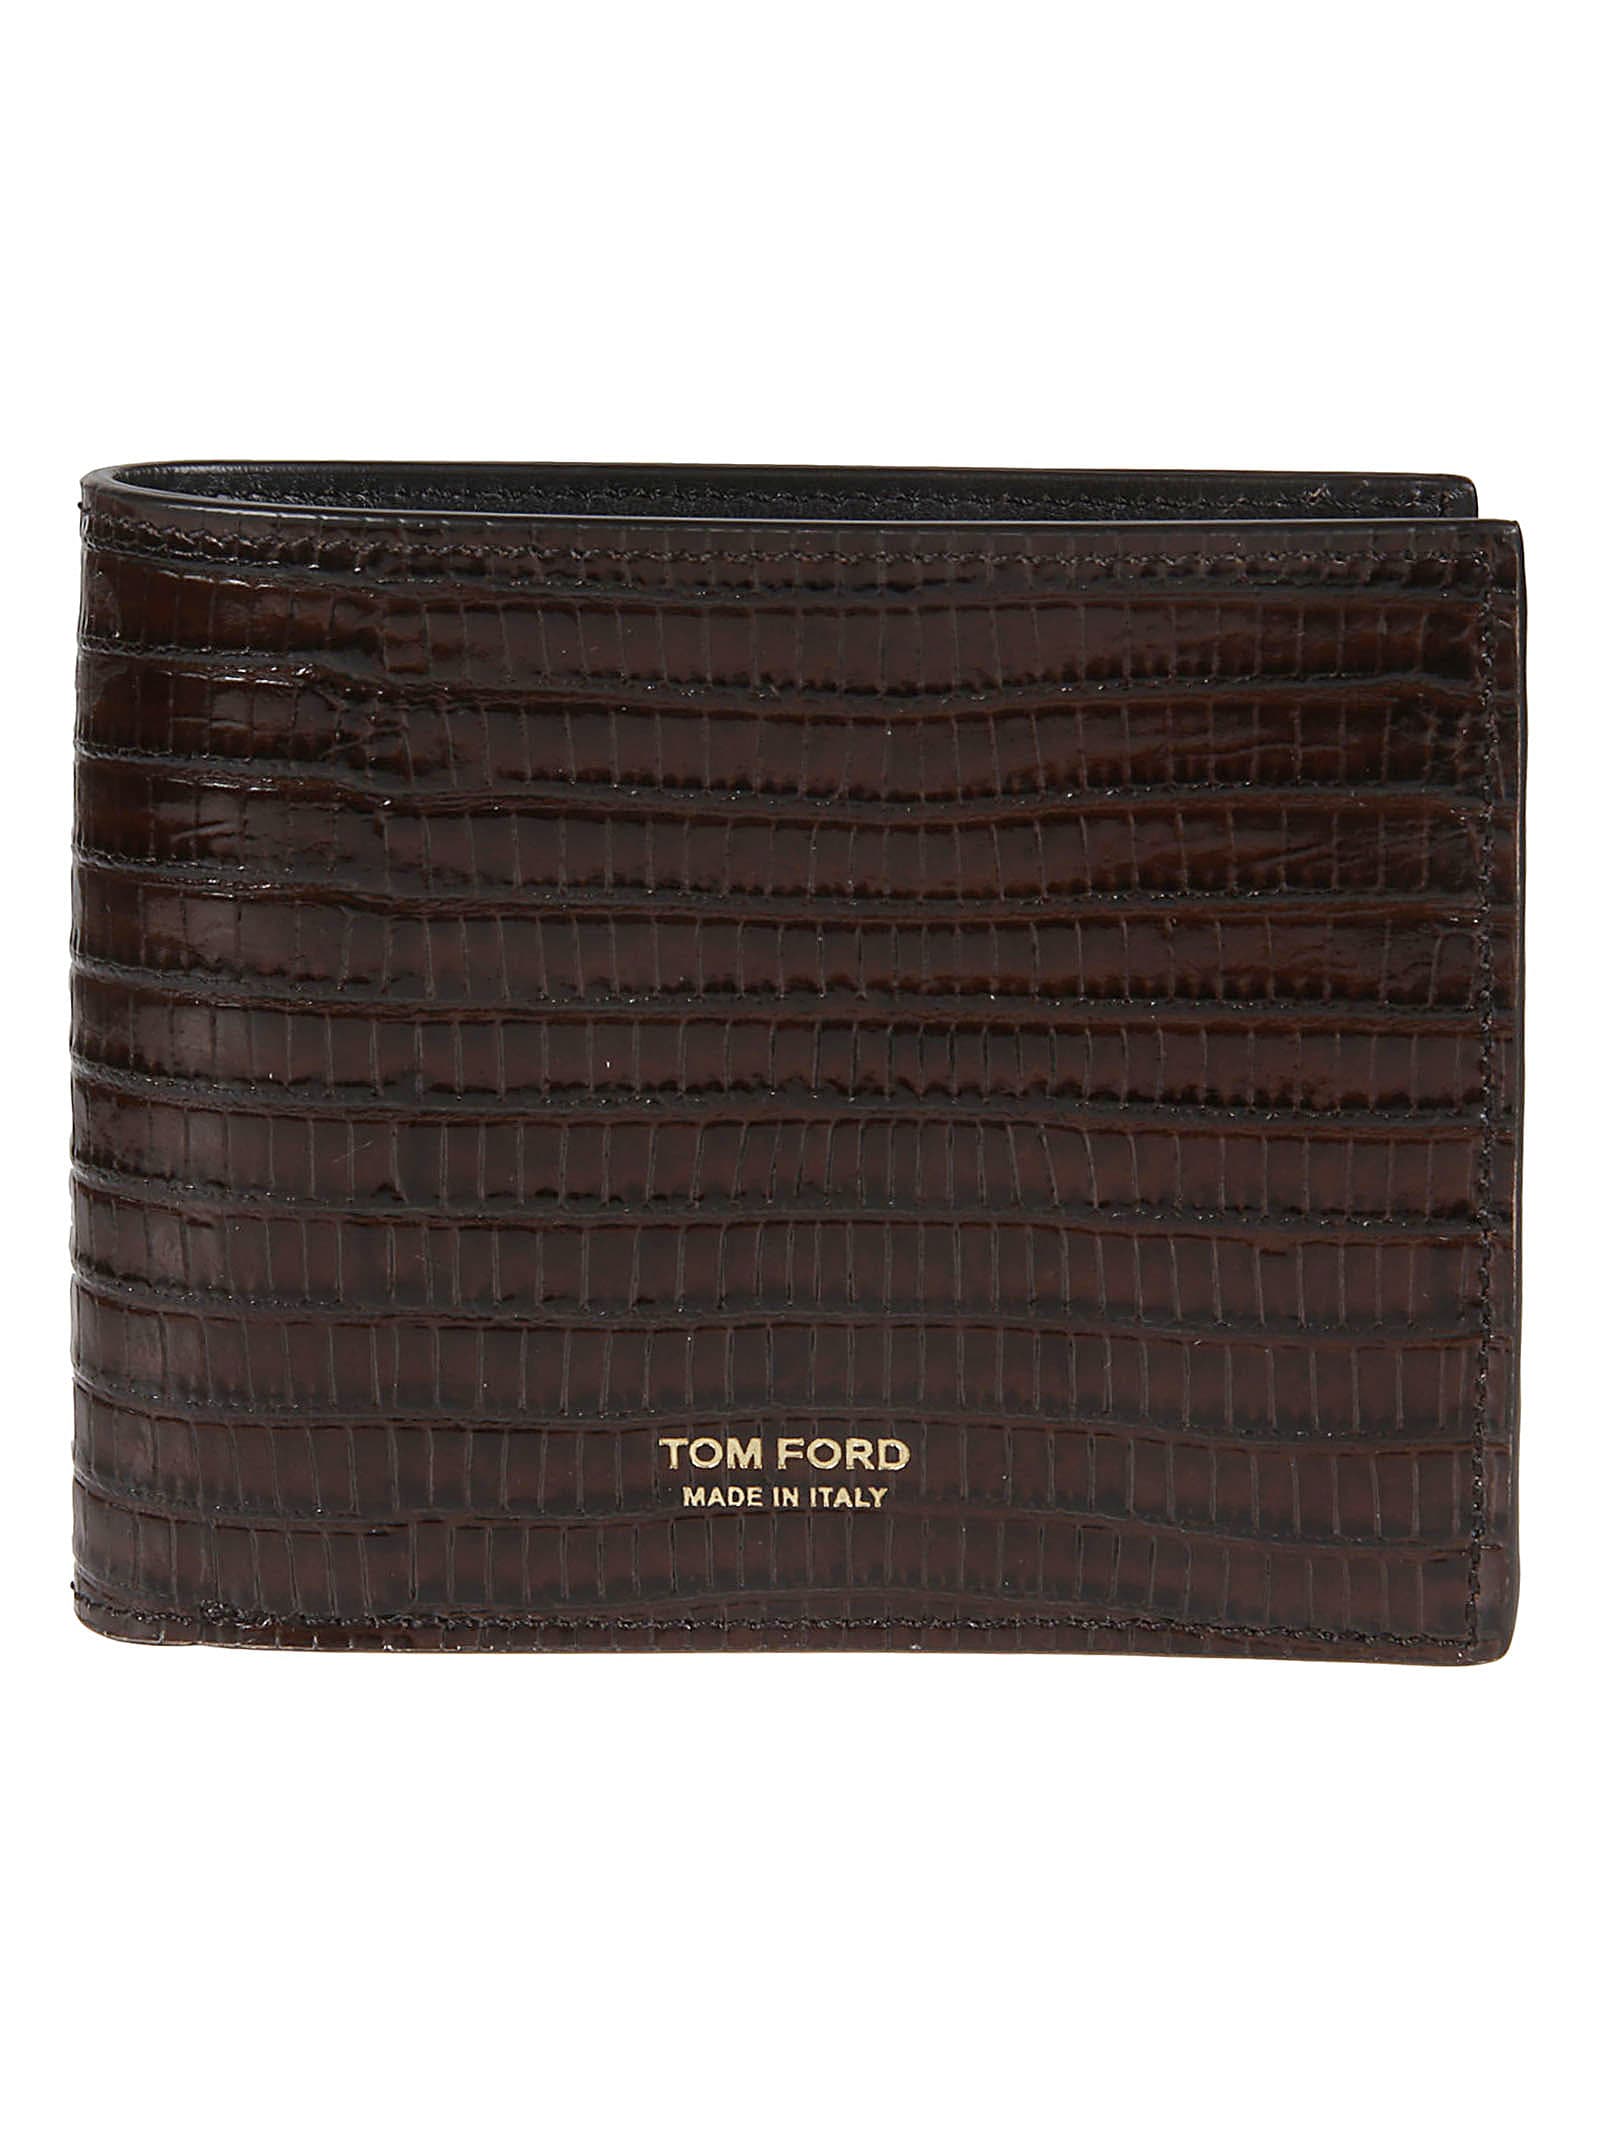 Tom Ford Printed Alligator Classic Bifold Wallet In Chicolate Brown